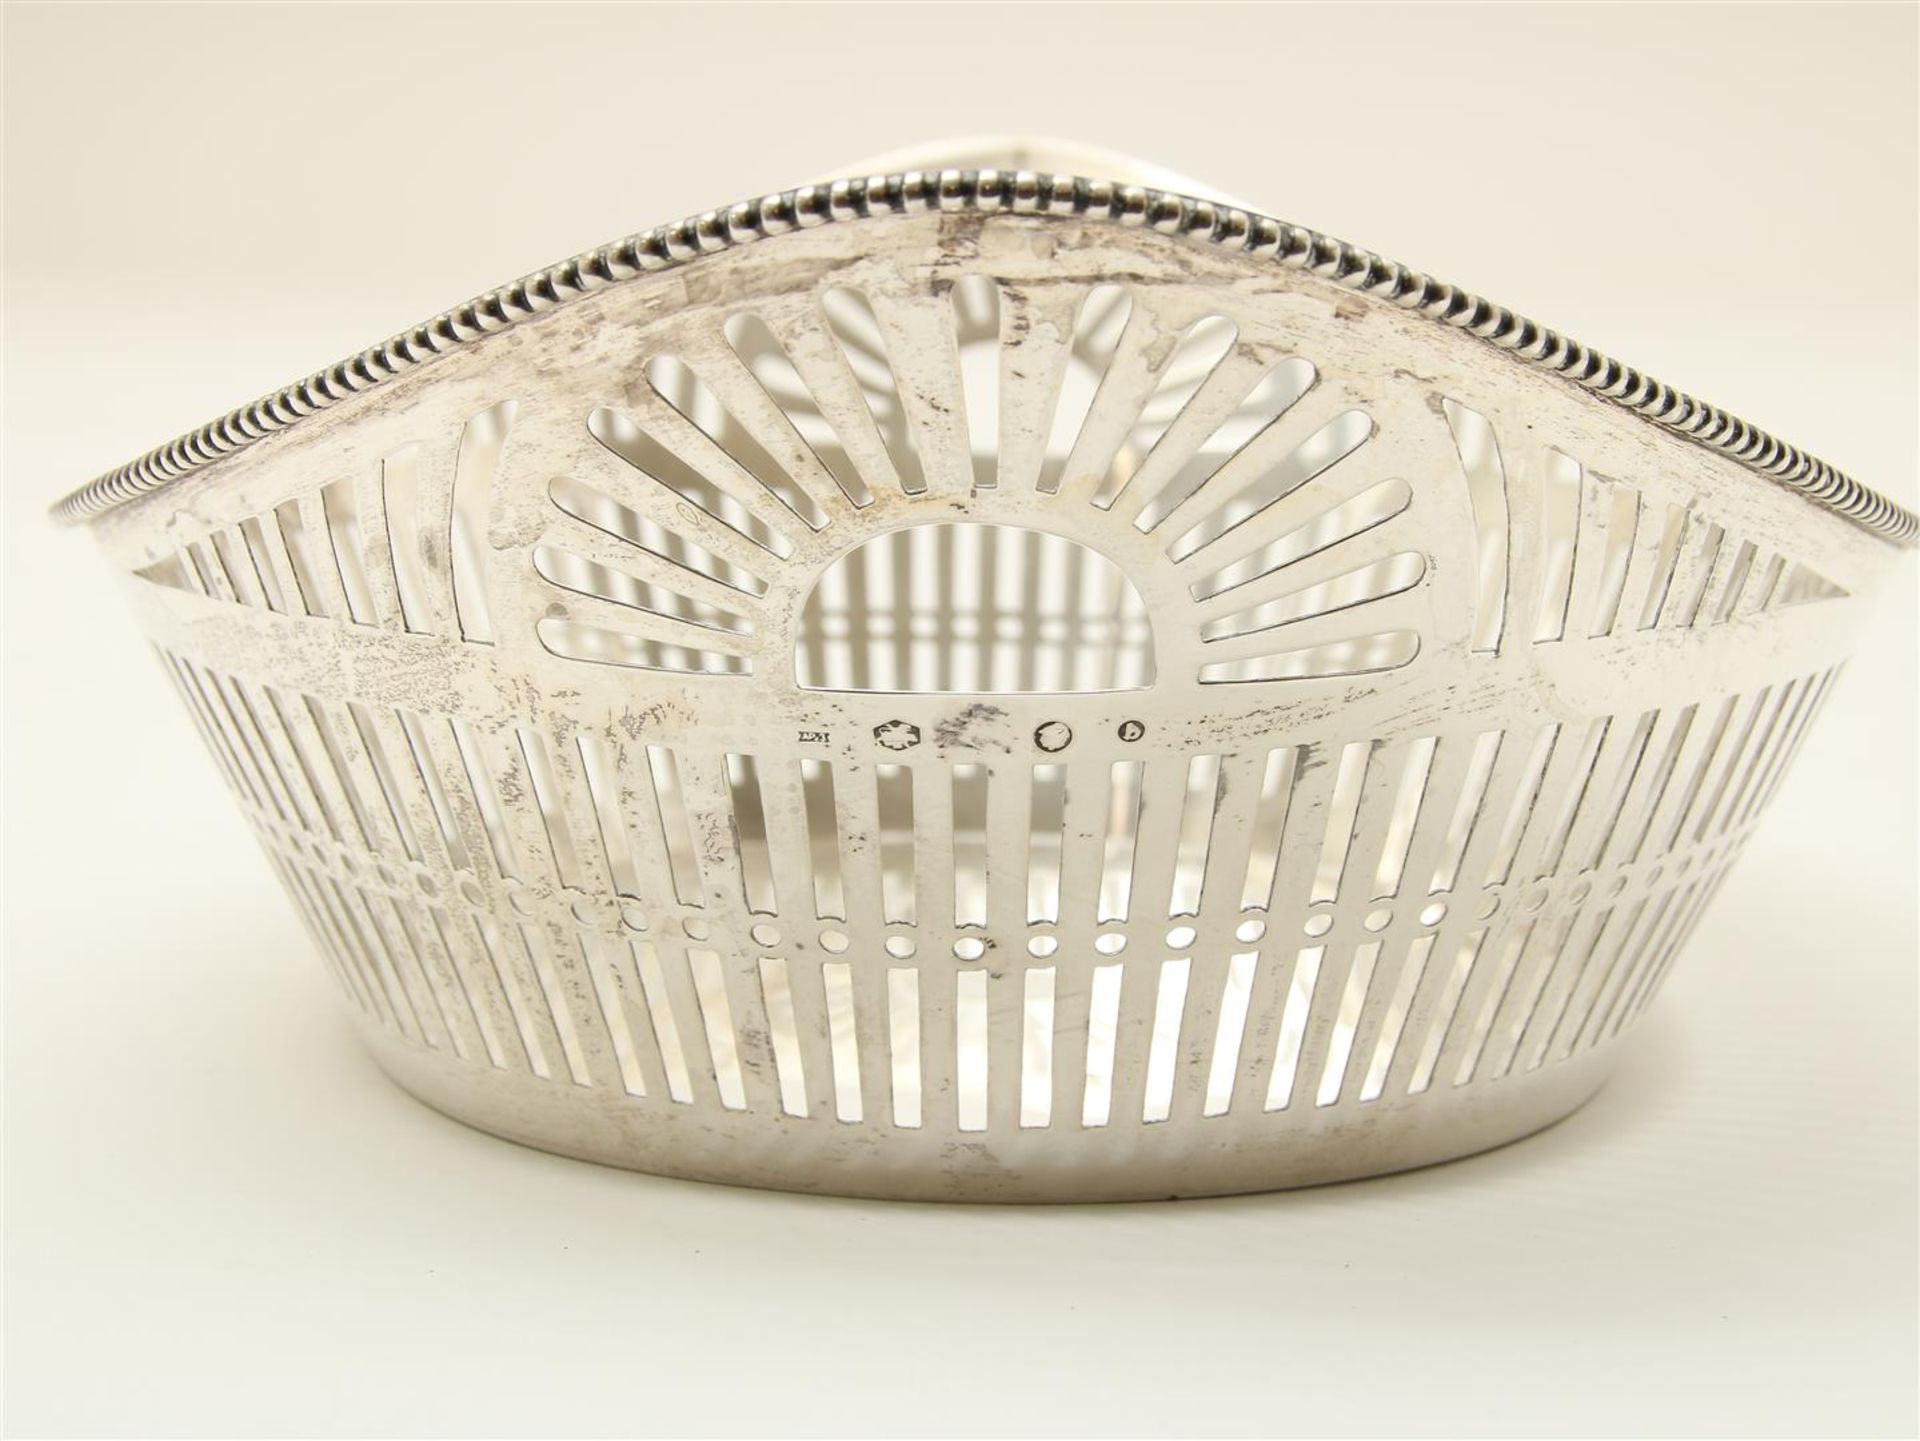 Openwork silver bread basket with curl and bar motif, trimmed with pearl edge, grade 835/000, - Image 2 of 5